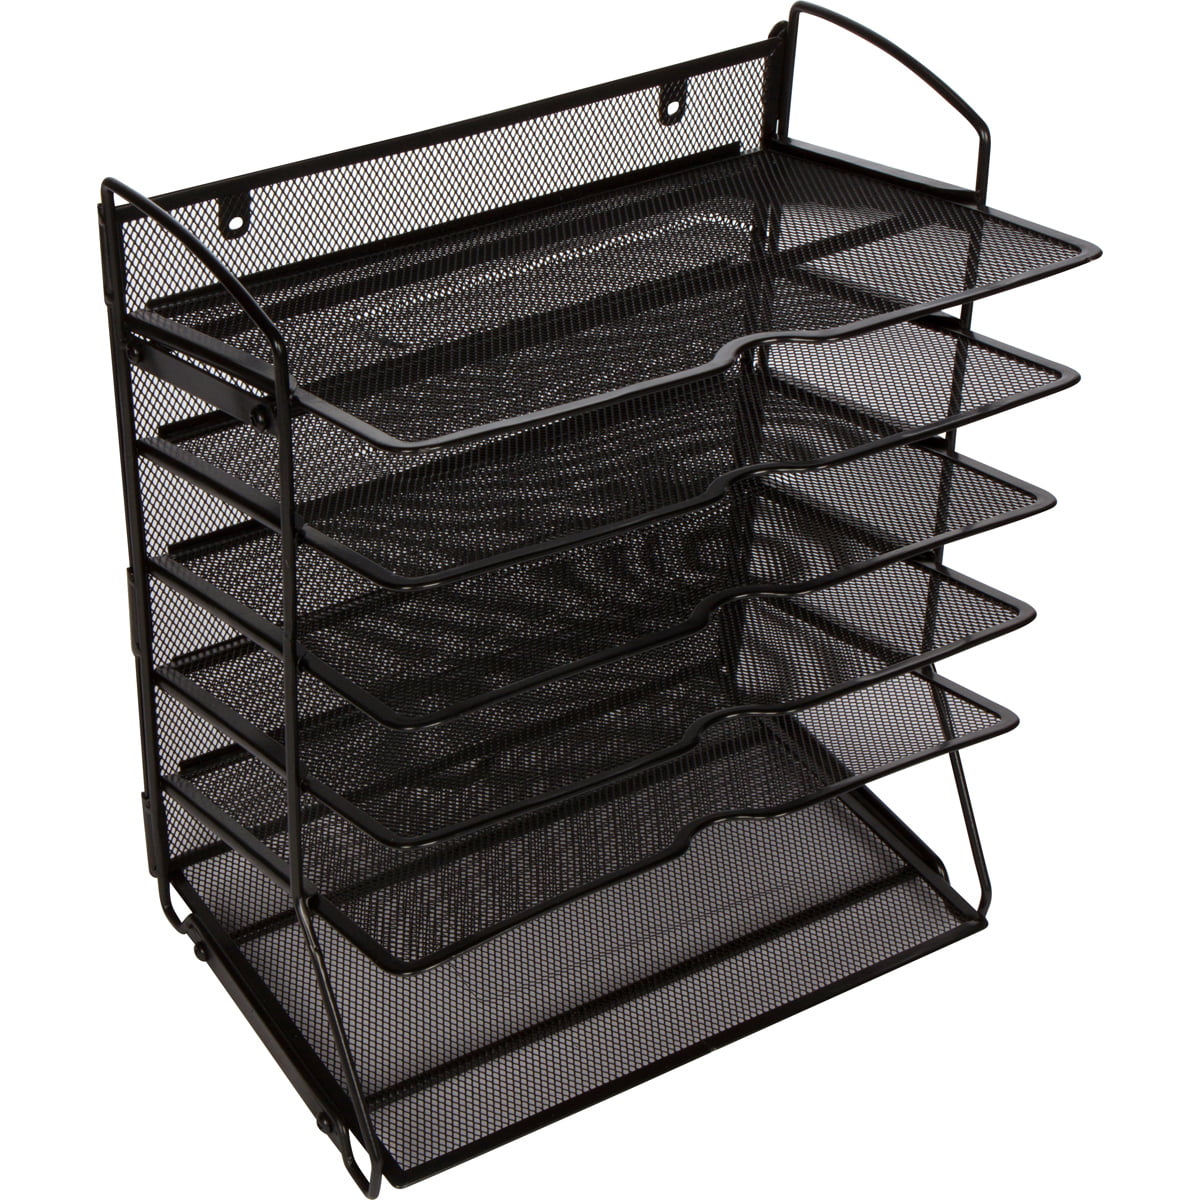 Mesh Desktop or Wall Mounted Document Tray Organizer 6 Tier Black Metal Wire Mesh File Holder